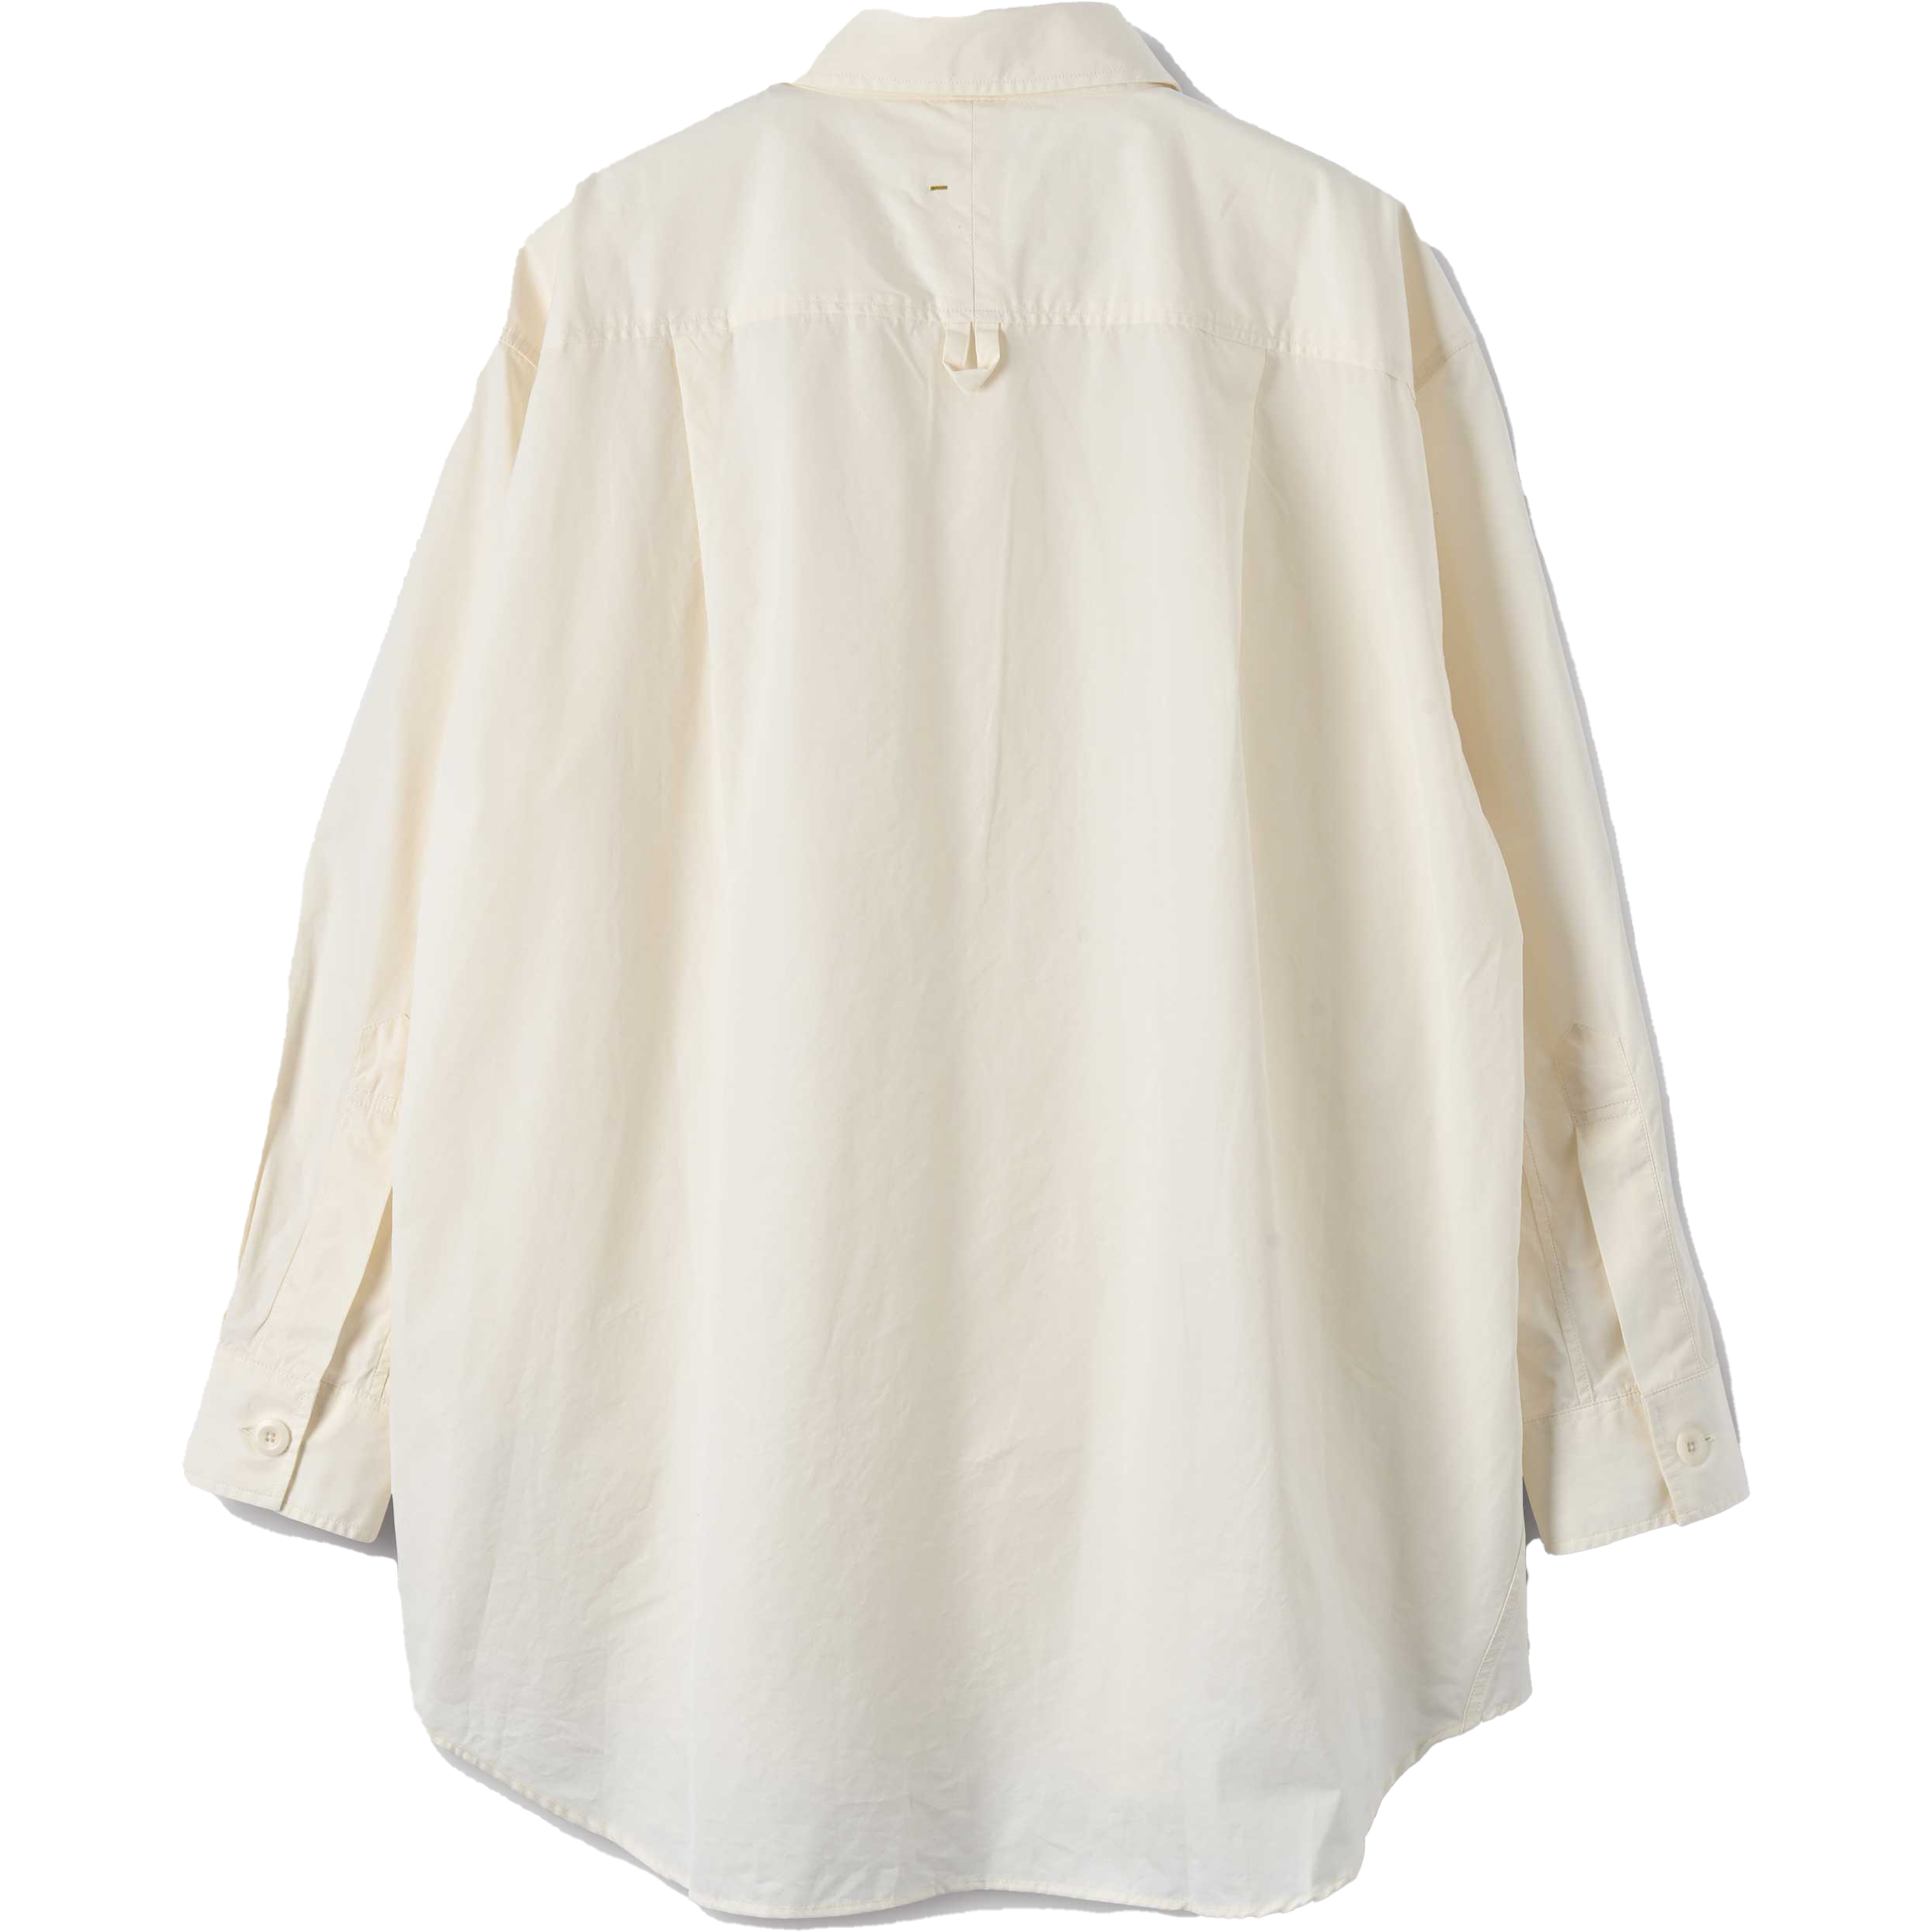 Margaret Howell W L/S Button Down Shirt Oversized Painters Shirt, Off White